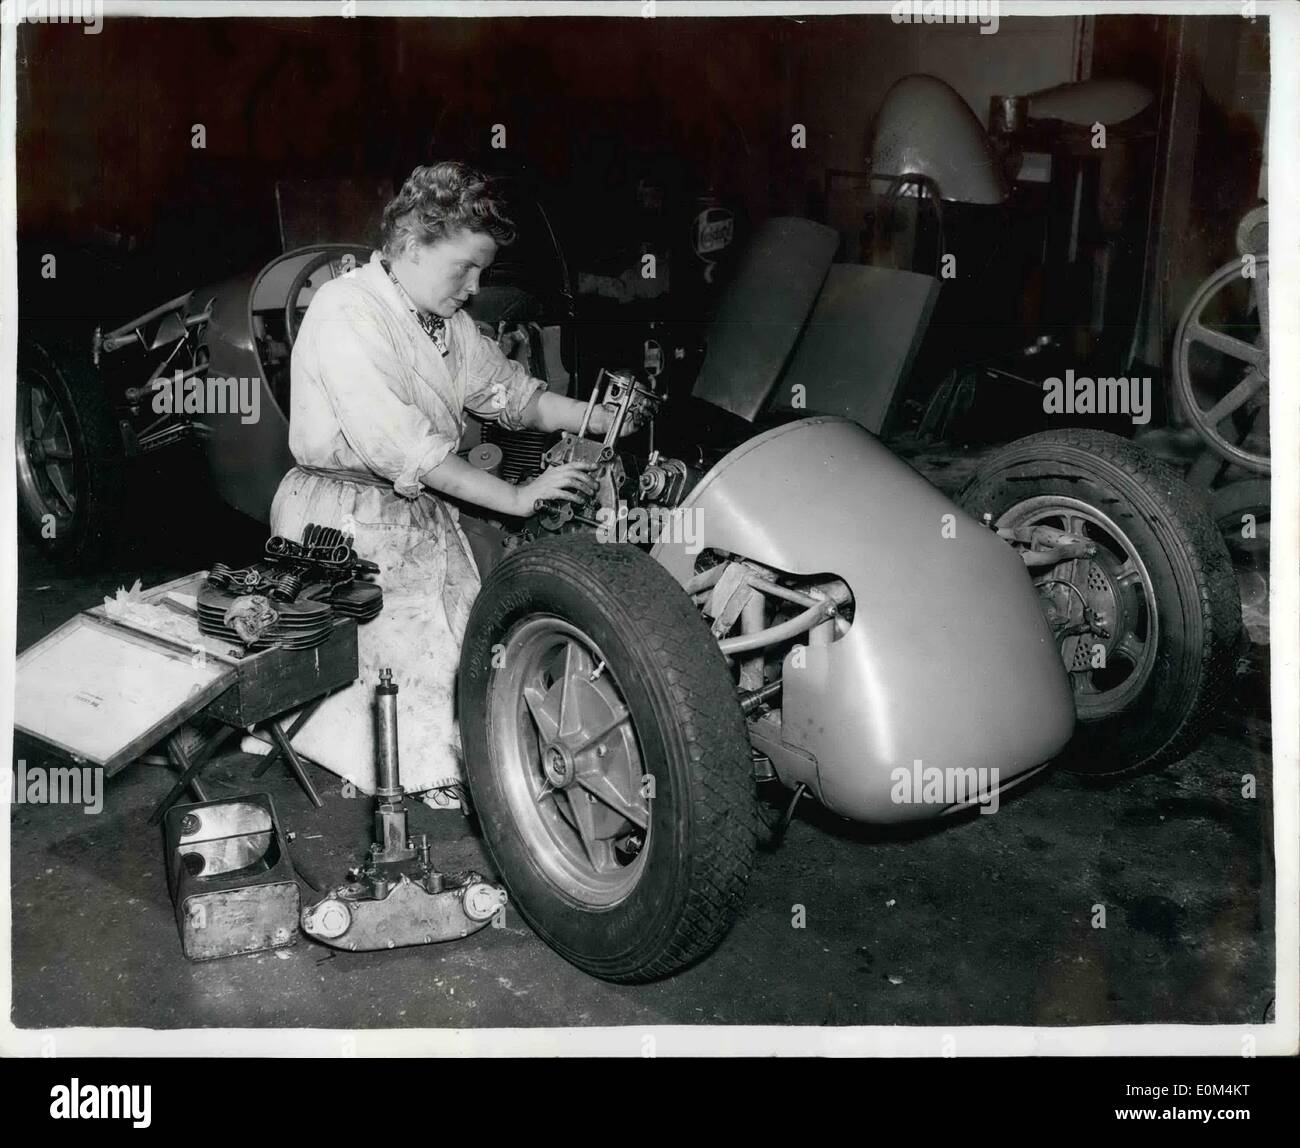 Jul. 07, 1953 - Britain's only girl racing car manufacturer; 27 year old Daphine Arnott, Britain's only girl racing car manufacturer, builds her car bodies with fiber glass. Her first glass car raced at Silverstone last Saturday. Amid the crackle of tuning engines in her Edgware, Middlesex, ''Shop'' yesterday she said she was going to fit all ten of ther squat racers wit h20 lb fiber glass bodies. They're a third of the weight of aluminum and a dent can be pressed out gently with the hand. Holes are easy to repair with a patch of the right size and a pot of glue Stock Photo